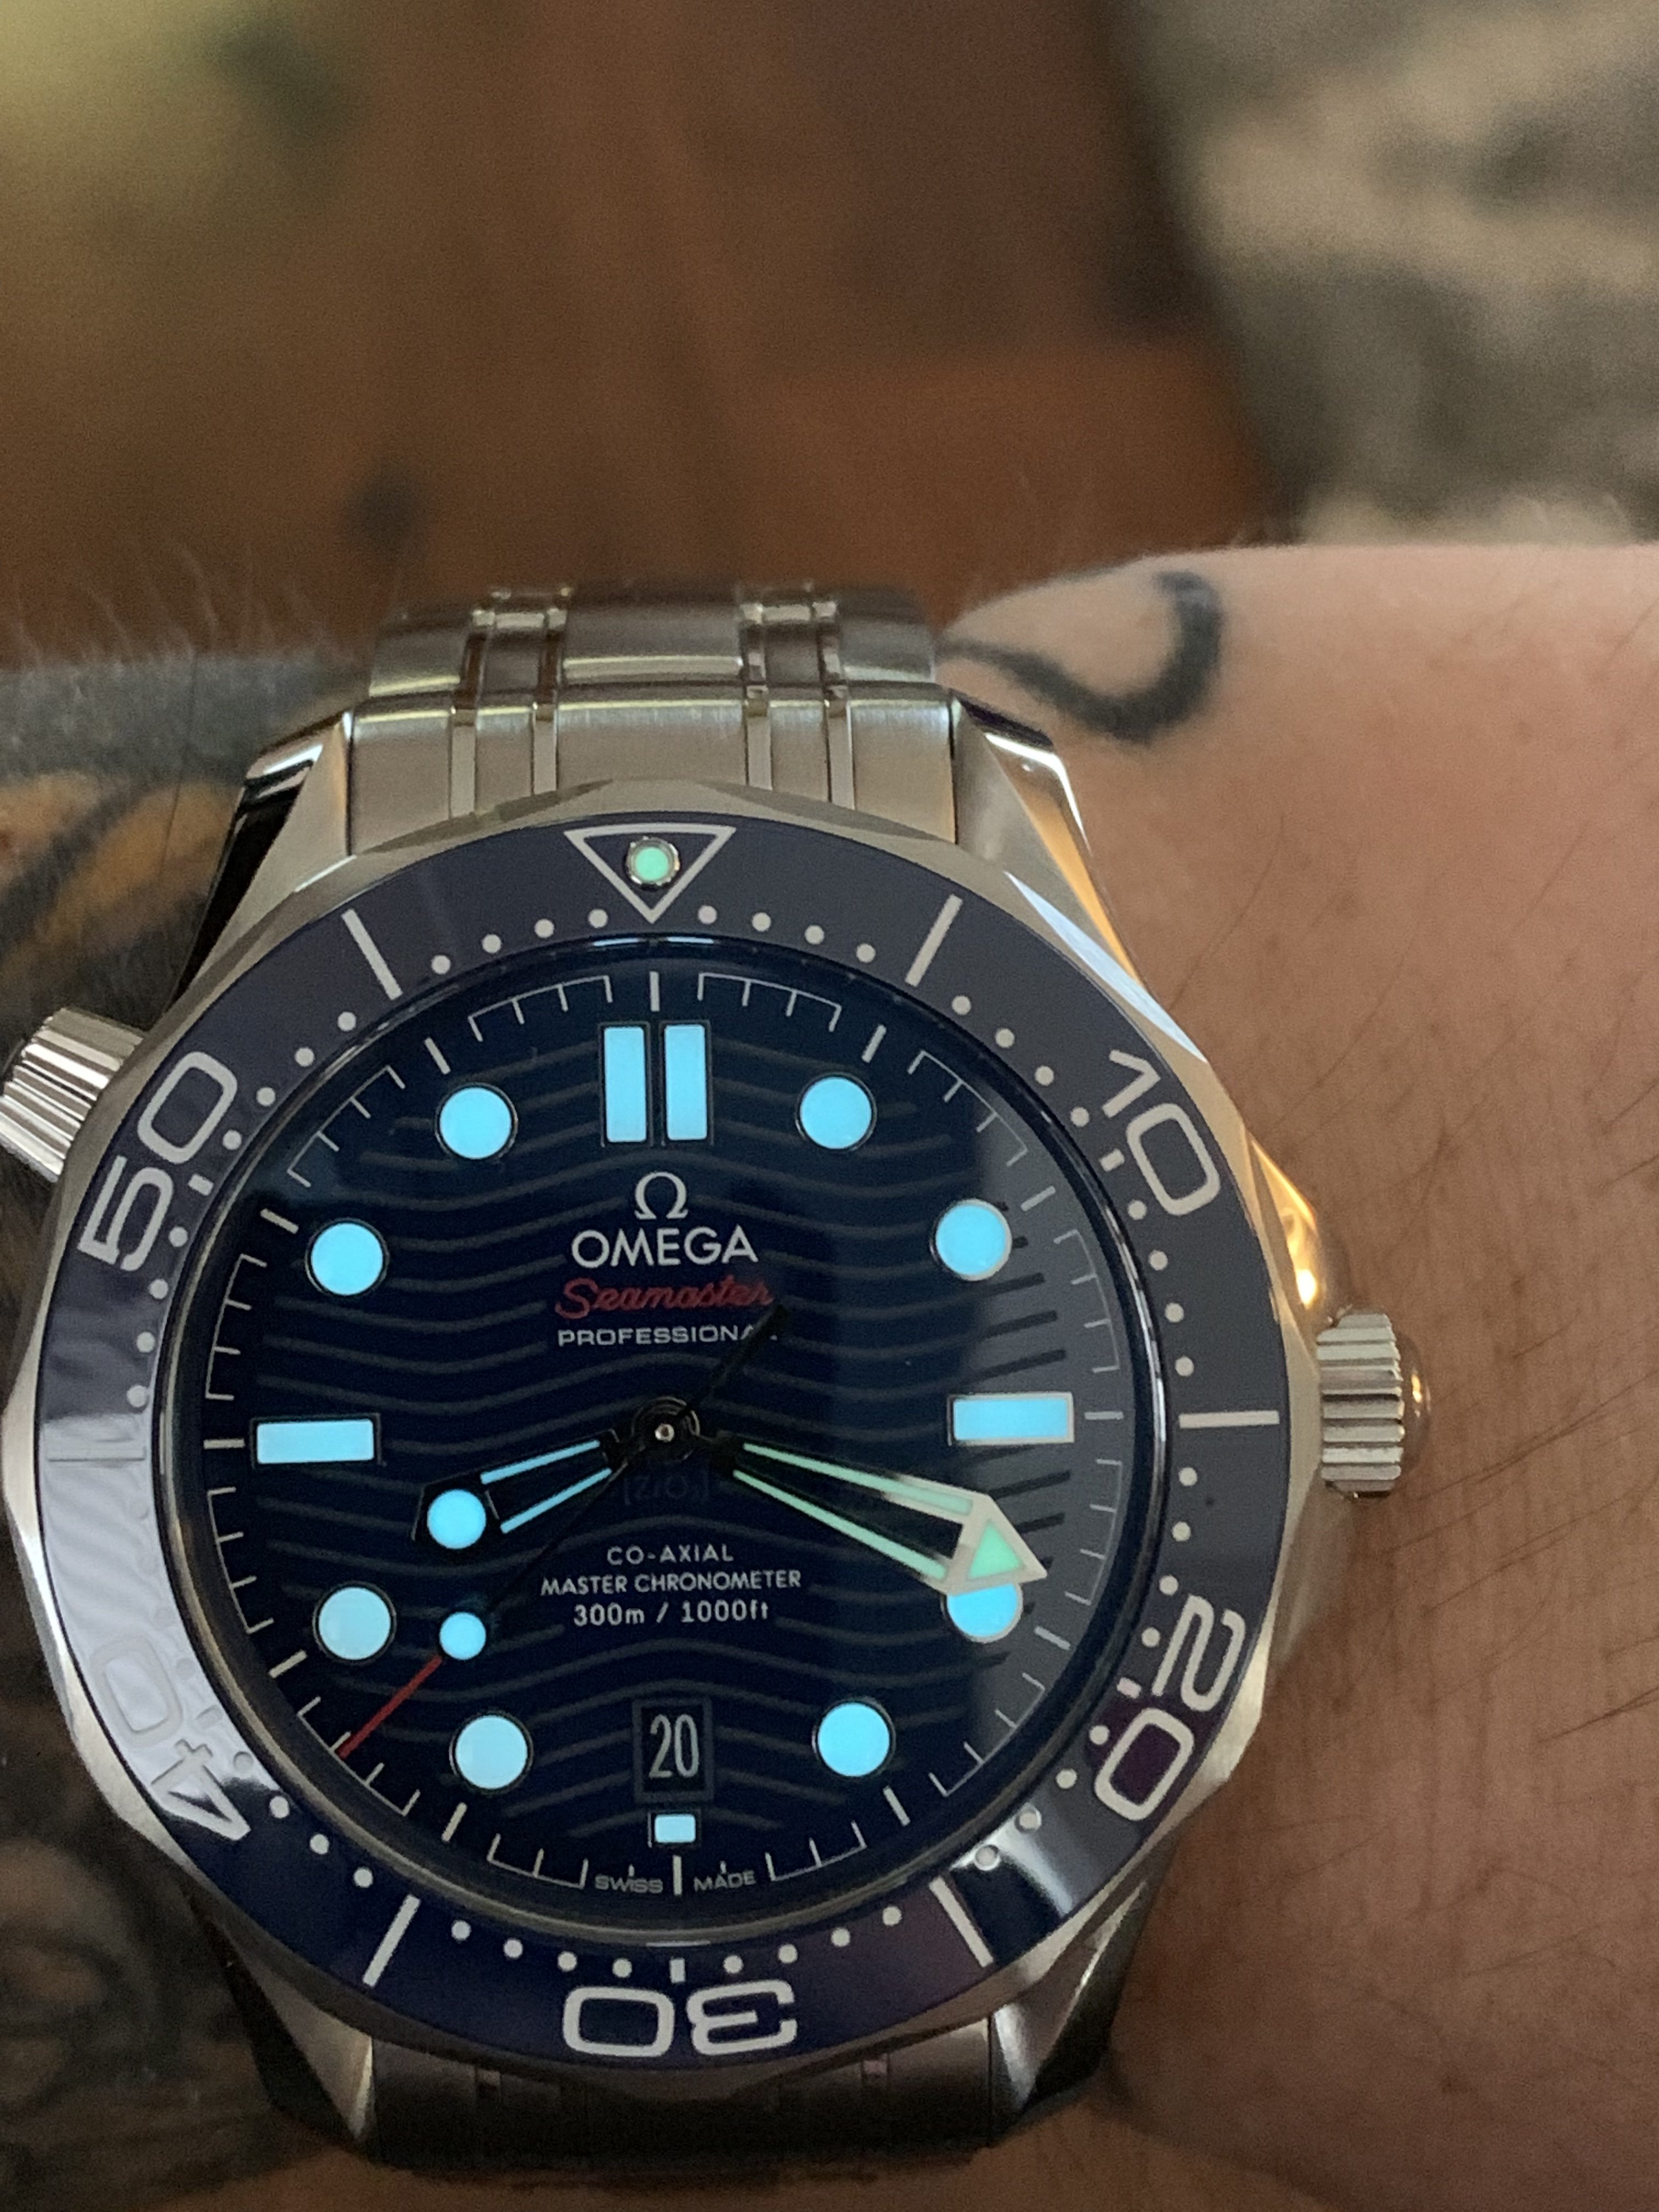 Calling all 2018 SMP 300m diver owners 